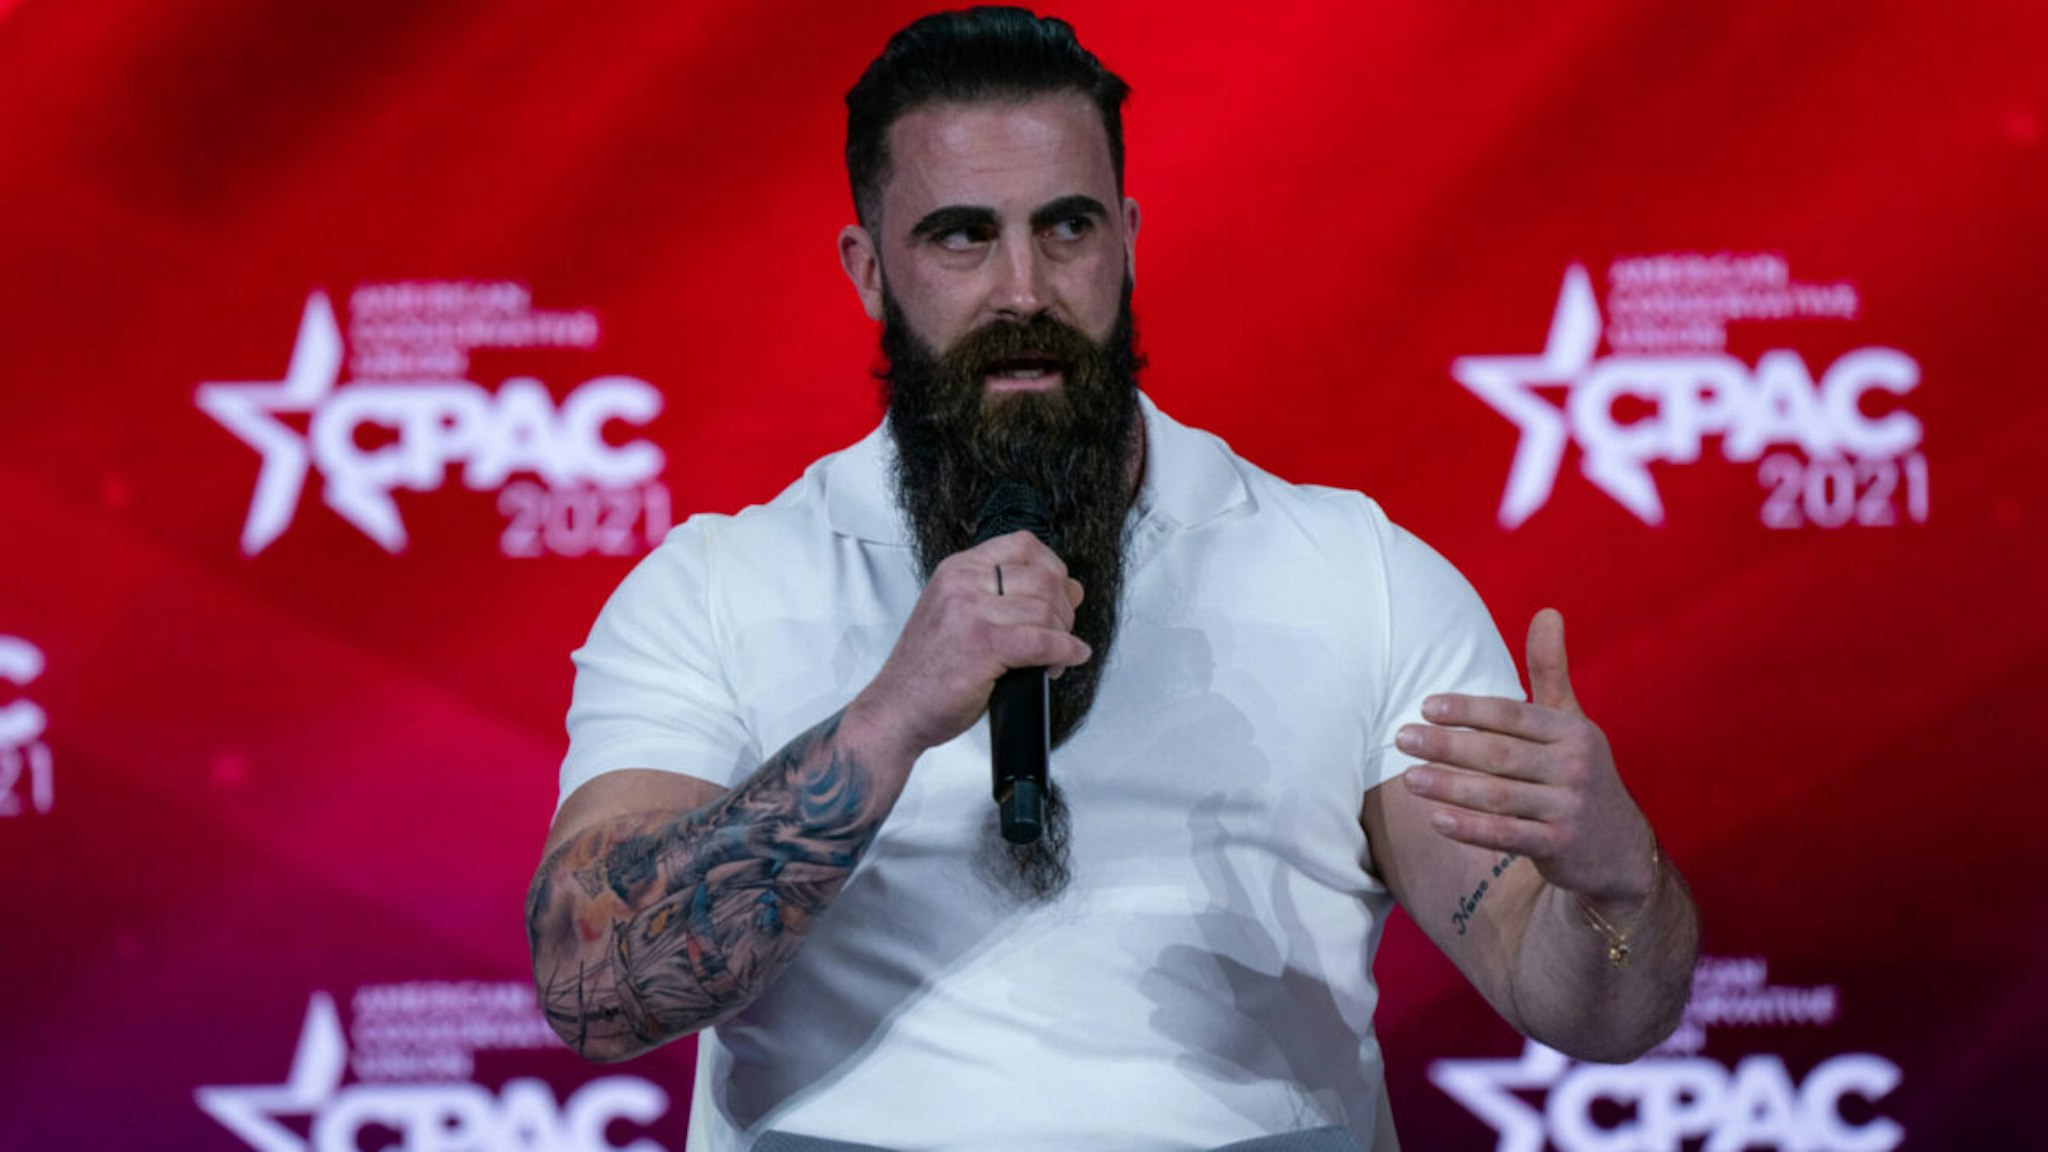 Ian Smith, owner of Atilis Gym in Bellmawr, New Jersey, speaks during the Conservative Political Action Conference (CPAC) in Orlando, Florida, U.S., on Friday, Feb. 26, 2021.